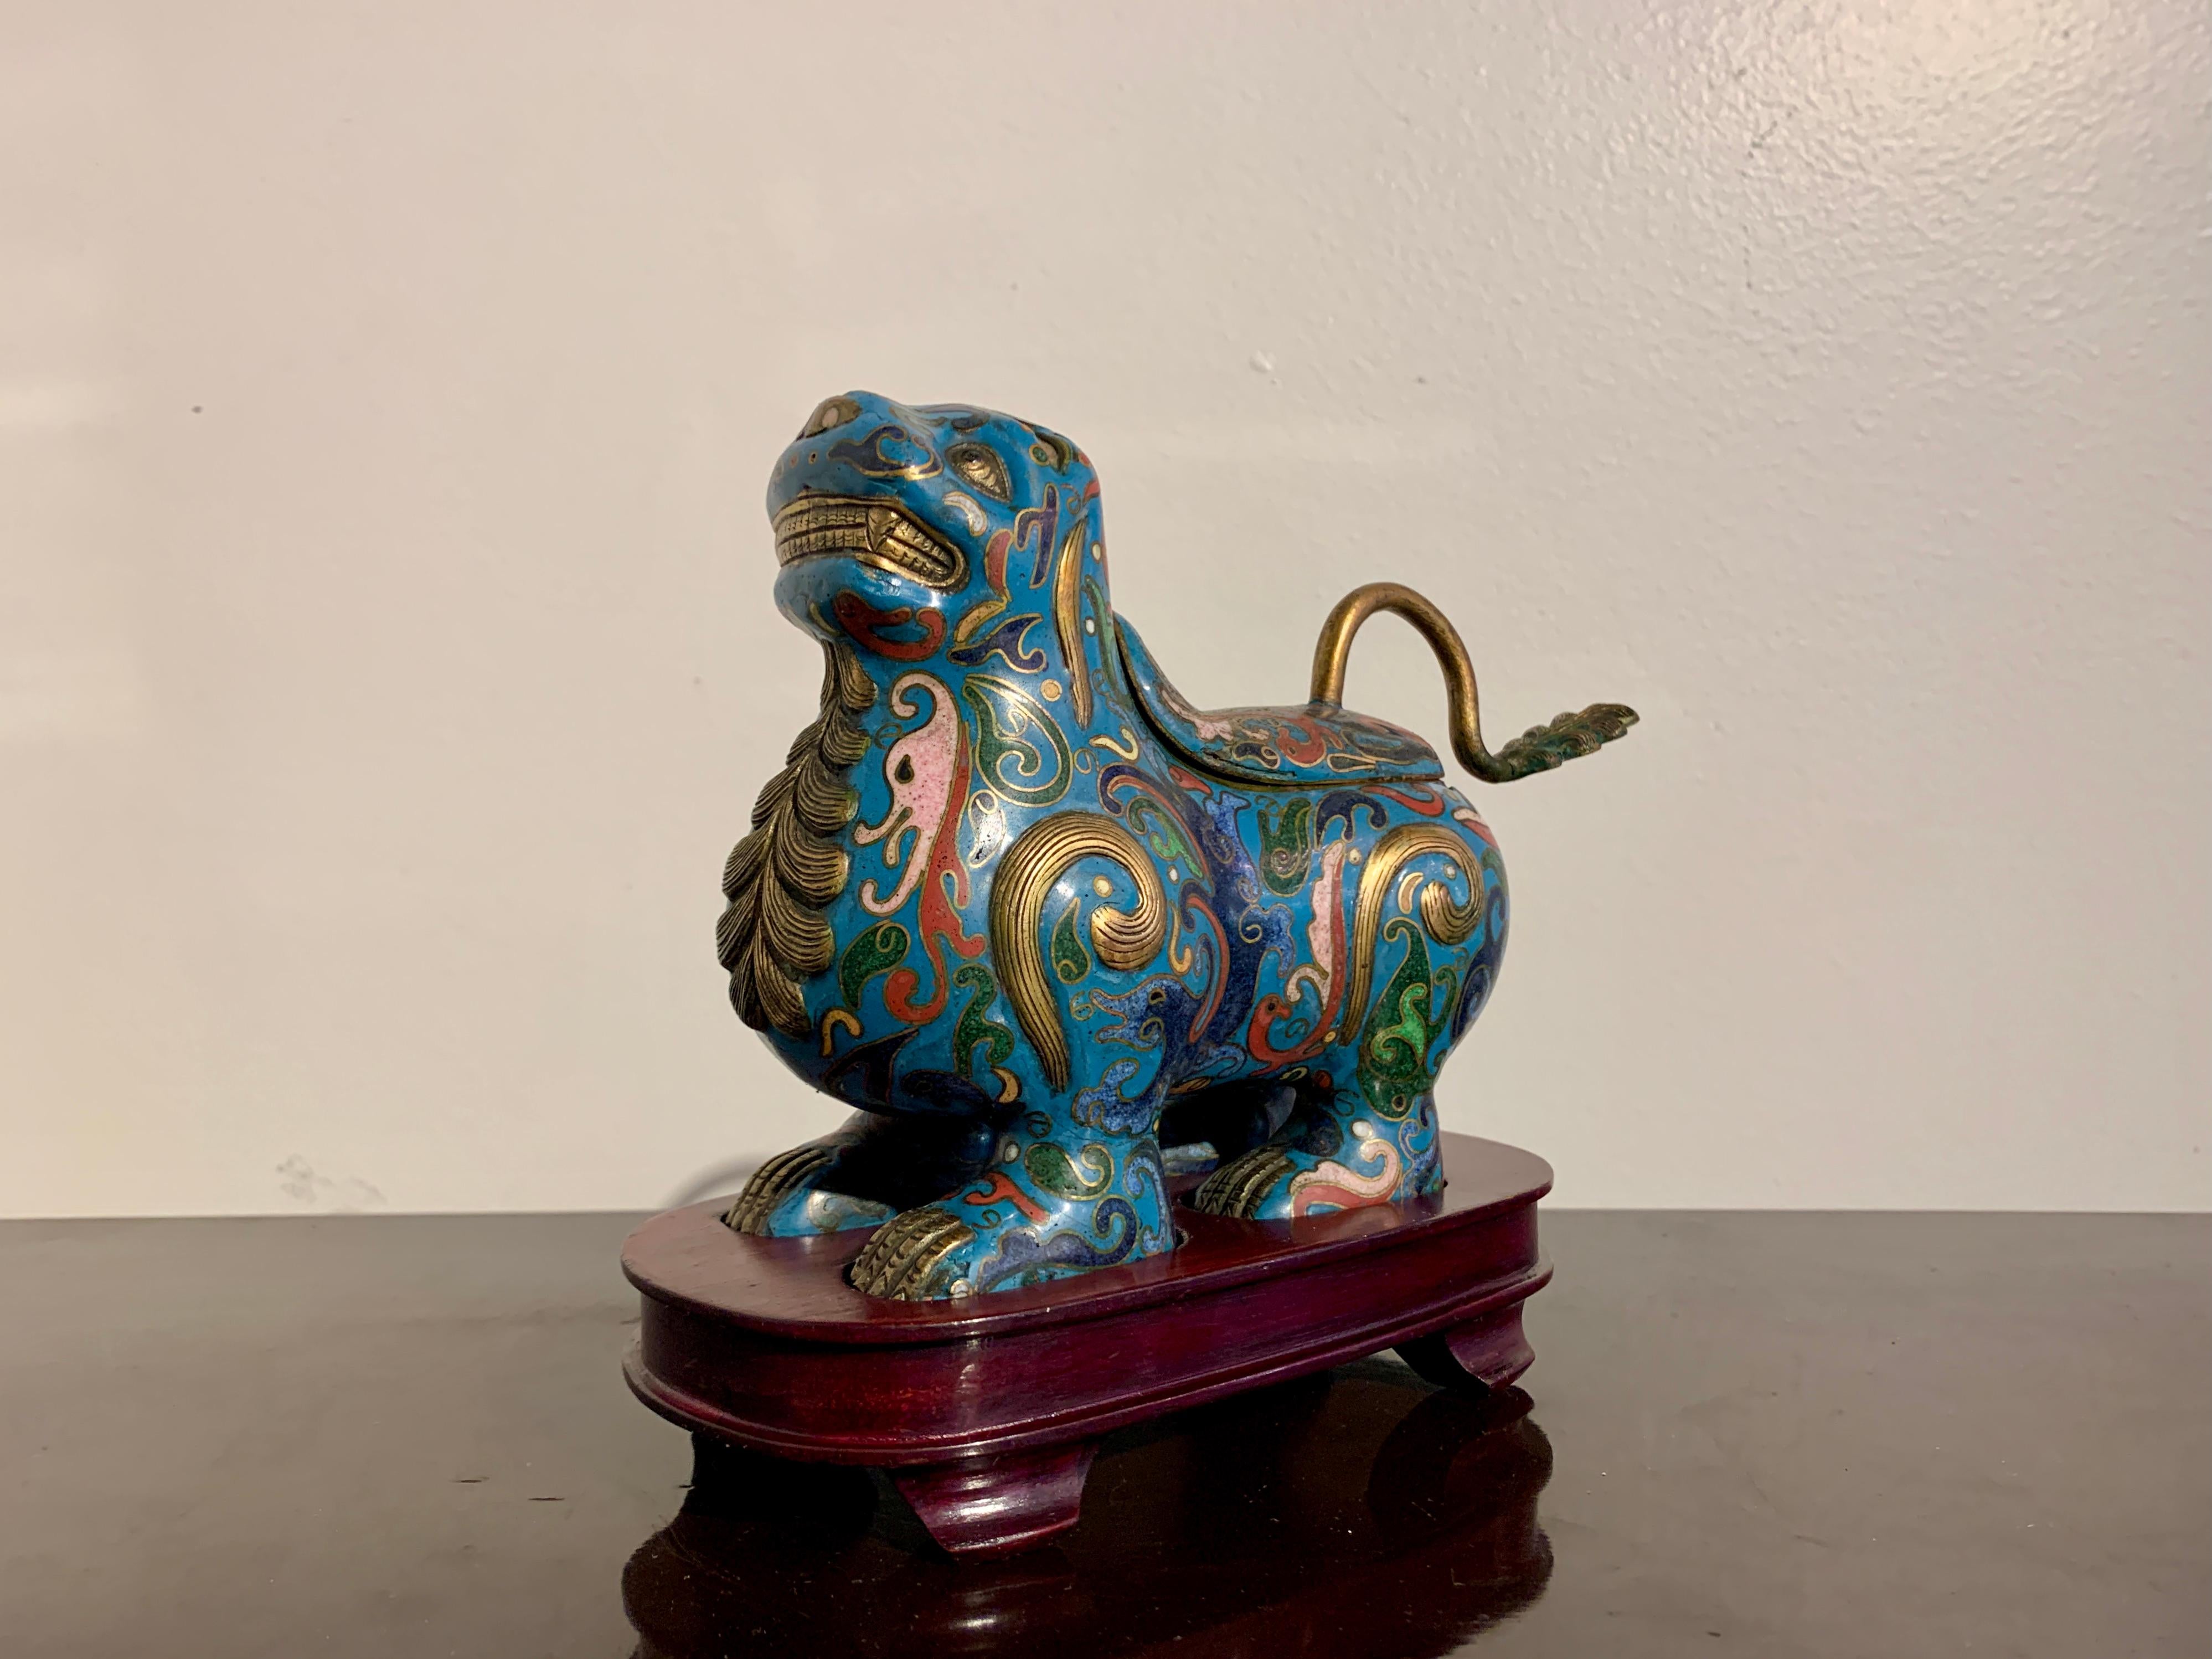 A charming and quirky Chinese cloisonné censer in the form of a lion, Republic Period, early 20th century, circa 1920s or 1930's, China. 

The cloisonné lion with a goofy expression on its face, its lips pulled back in an awkward smile, teeth and